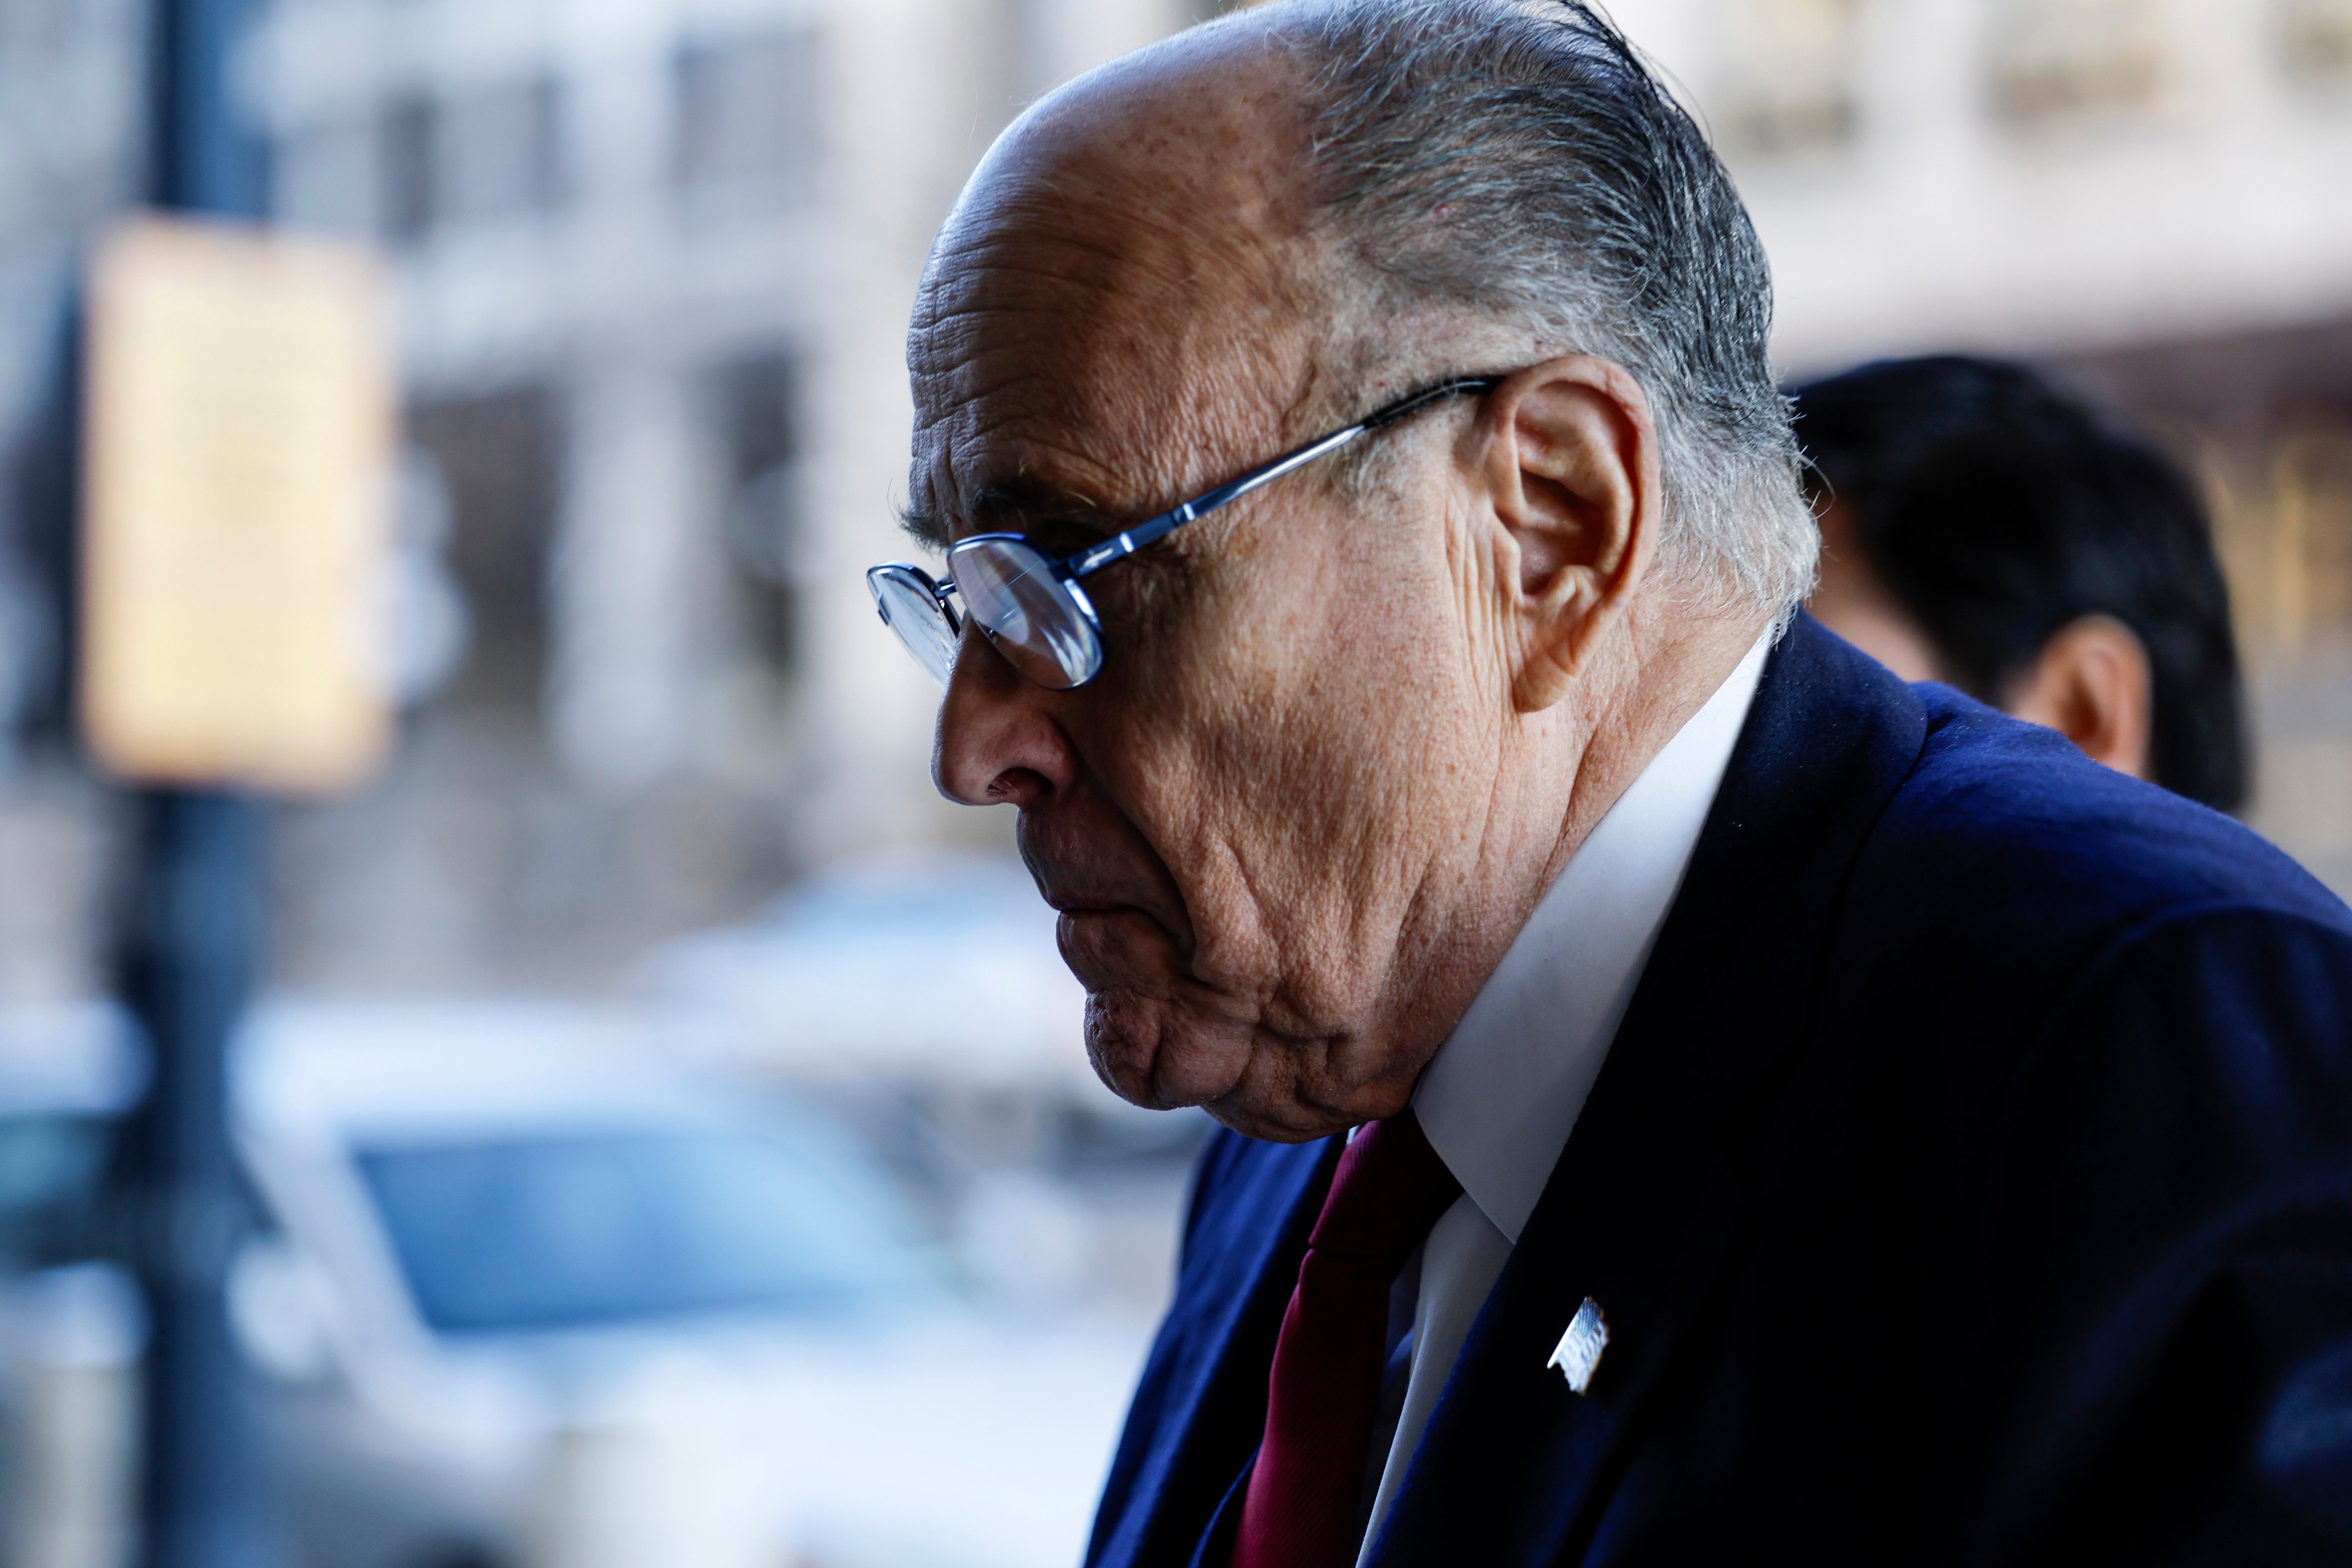 Rudy Giuliani arrives at the E Barrett Prettyman US District Courthouse ahead of the verdict in his defamation case